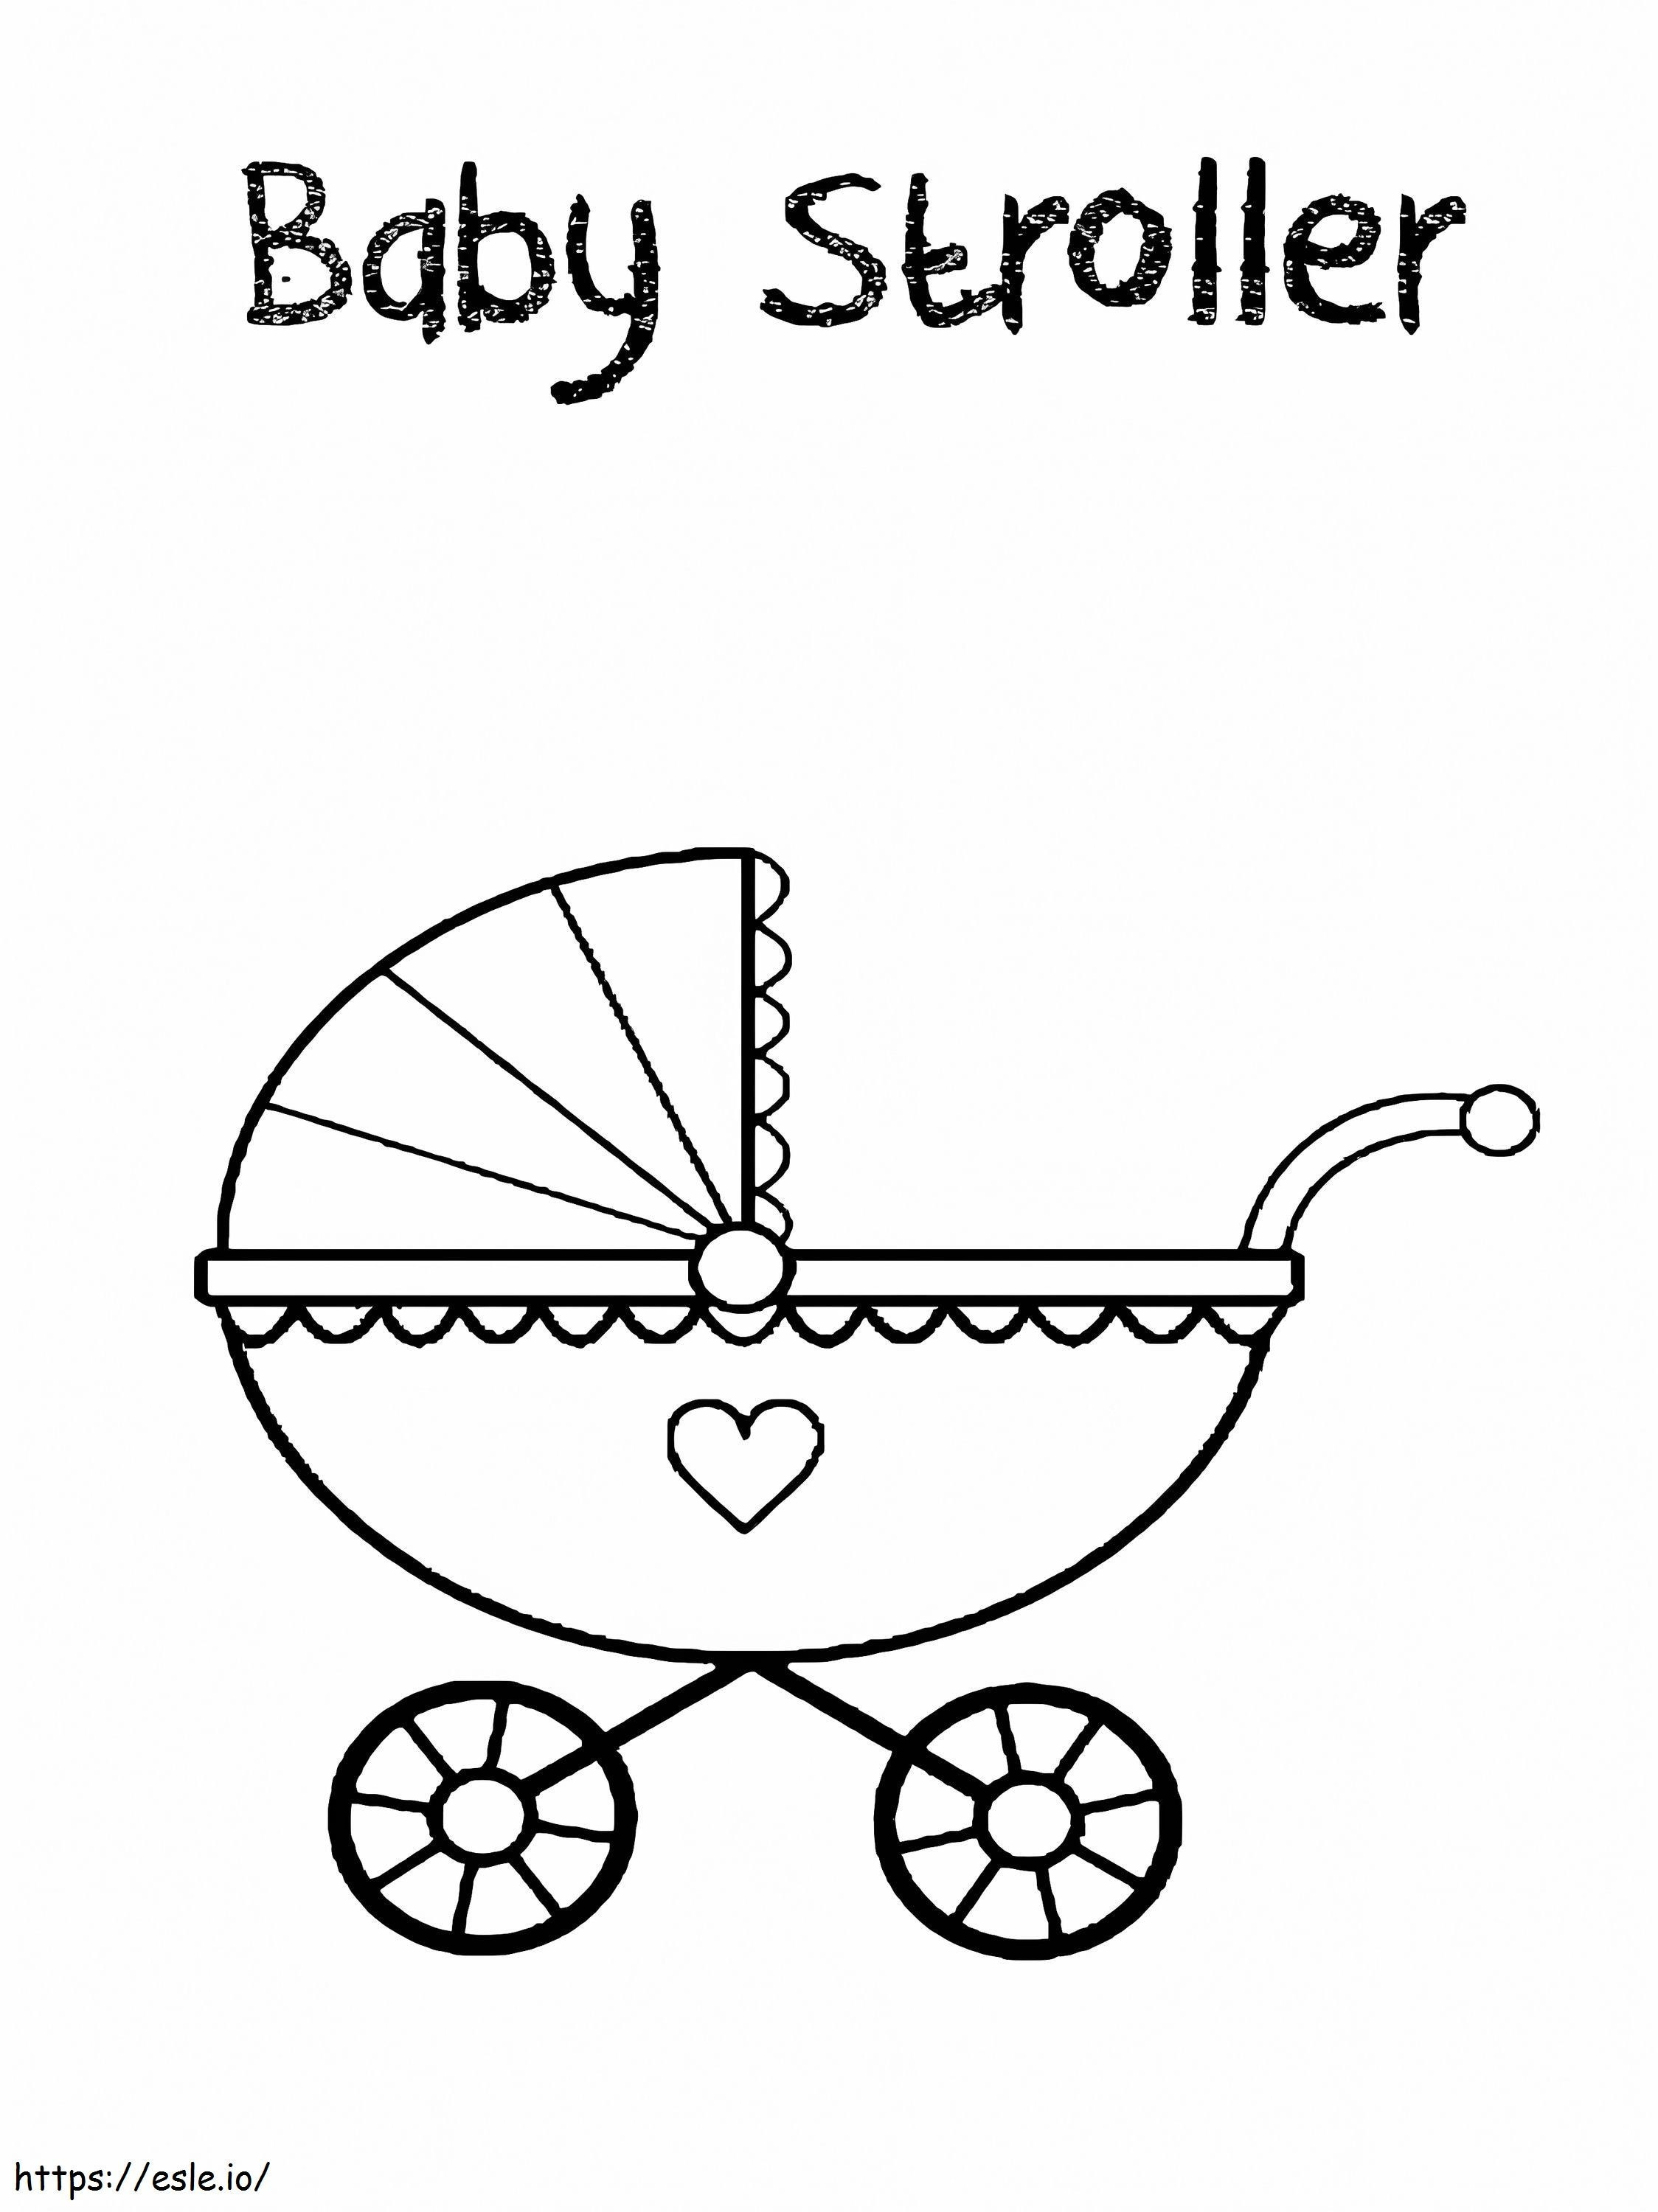 Baby Stroller Coloring Page coloring page